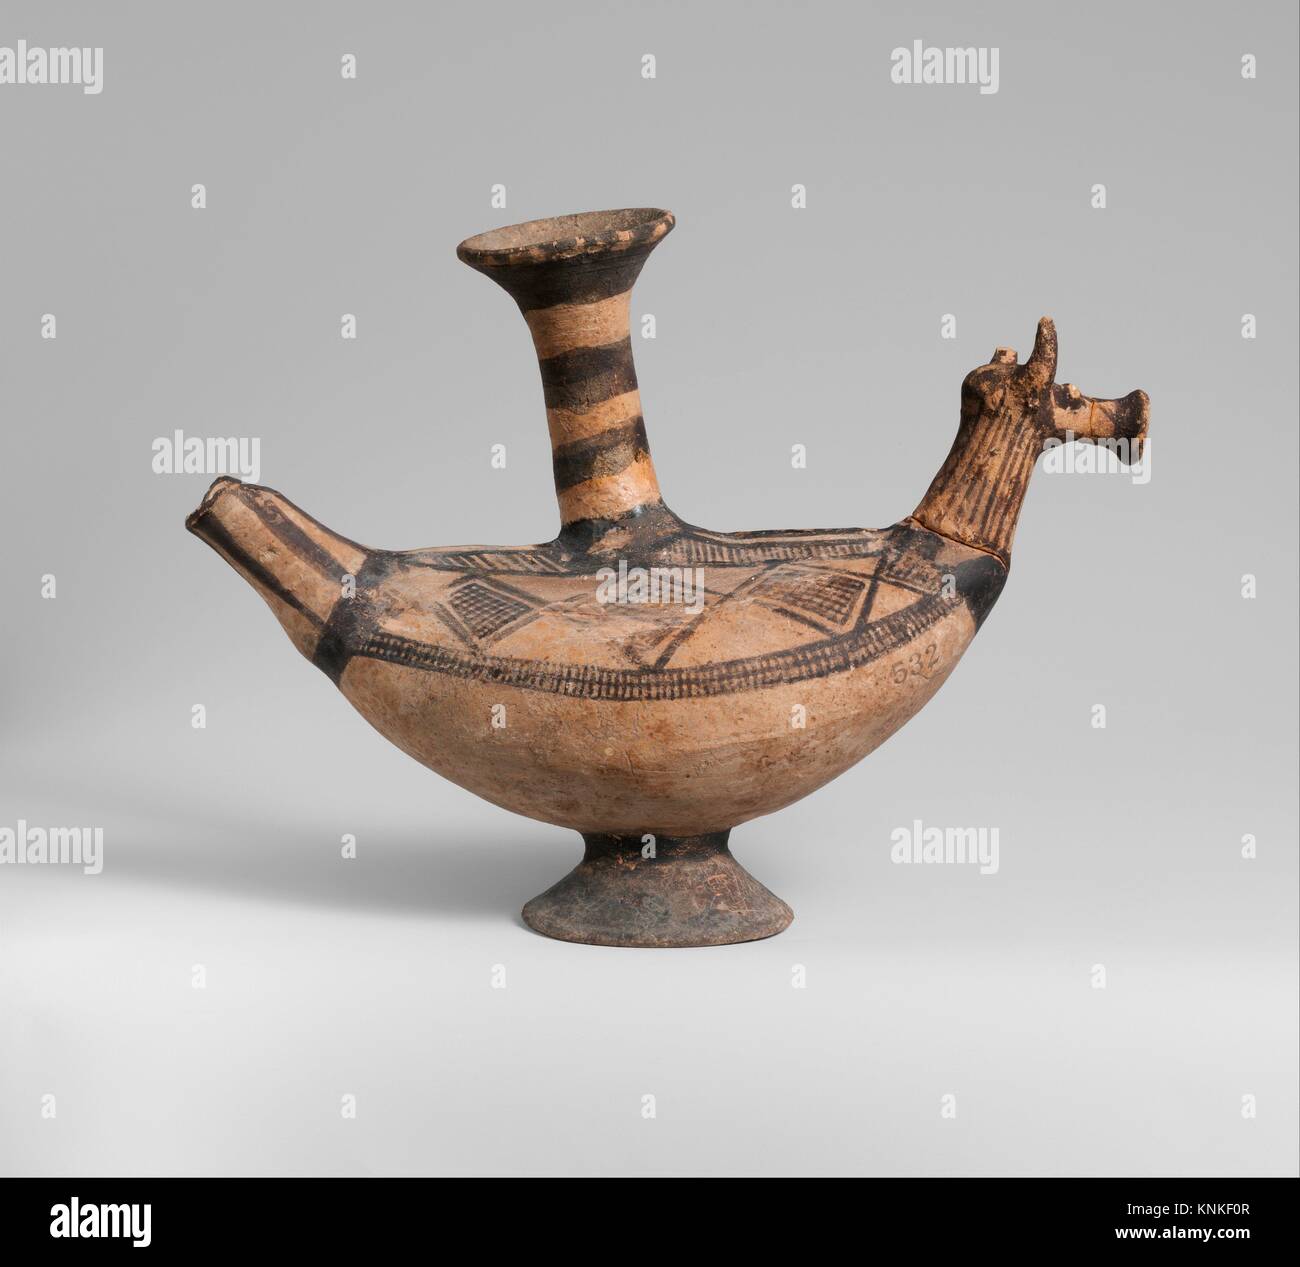 Terracotta vase in the form of an animal. Period: Cypro-Geometric I; Date: 1050-950 B.C; Culture: Cypriot; Medium: Terracotta; Dimensions: H. 7 5/16 Stock Photo